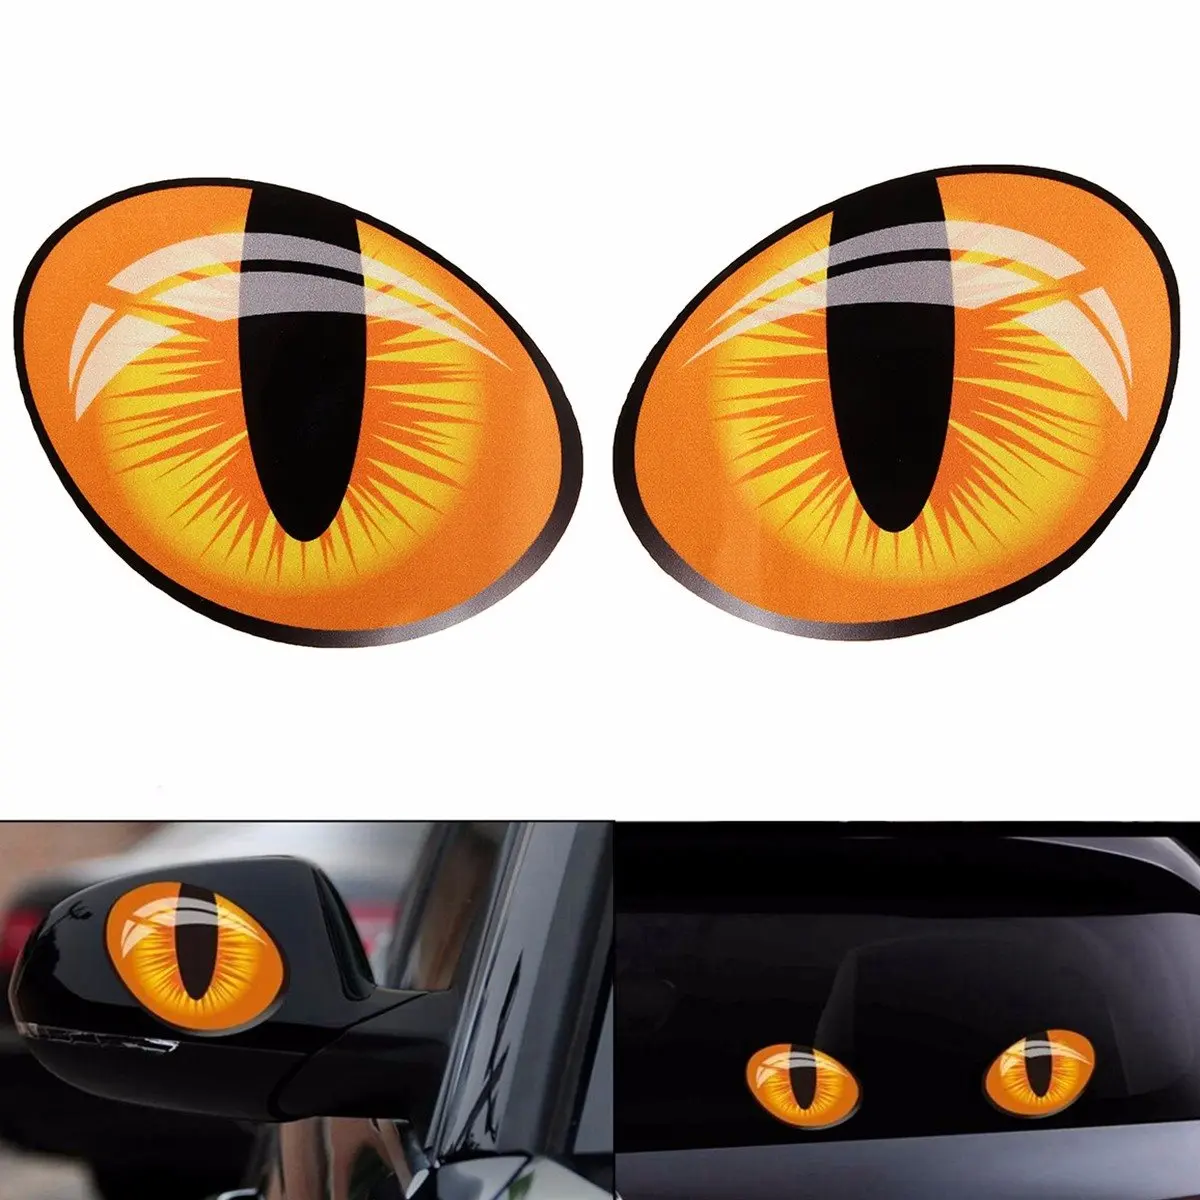 Image 3D Funny Reflective Cat Eyes Car Stickers Truck Window Door Decal Graphics Sticker Decals On Cars Rearview Mirror Head10*8cm